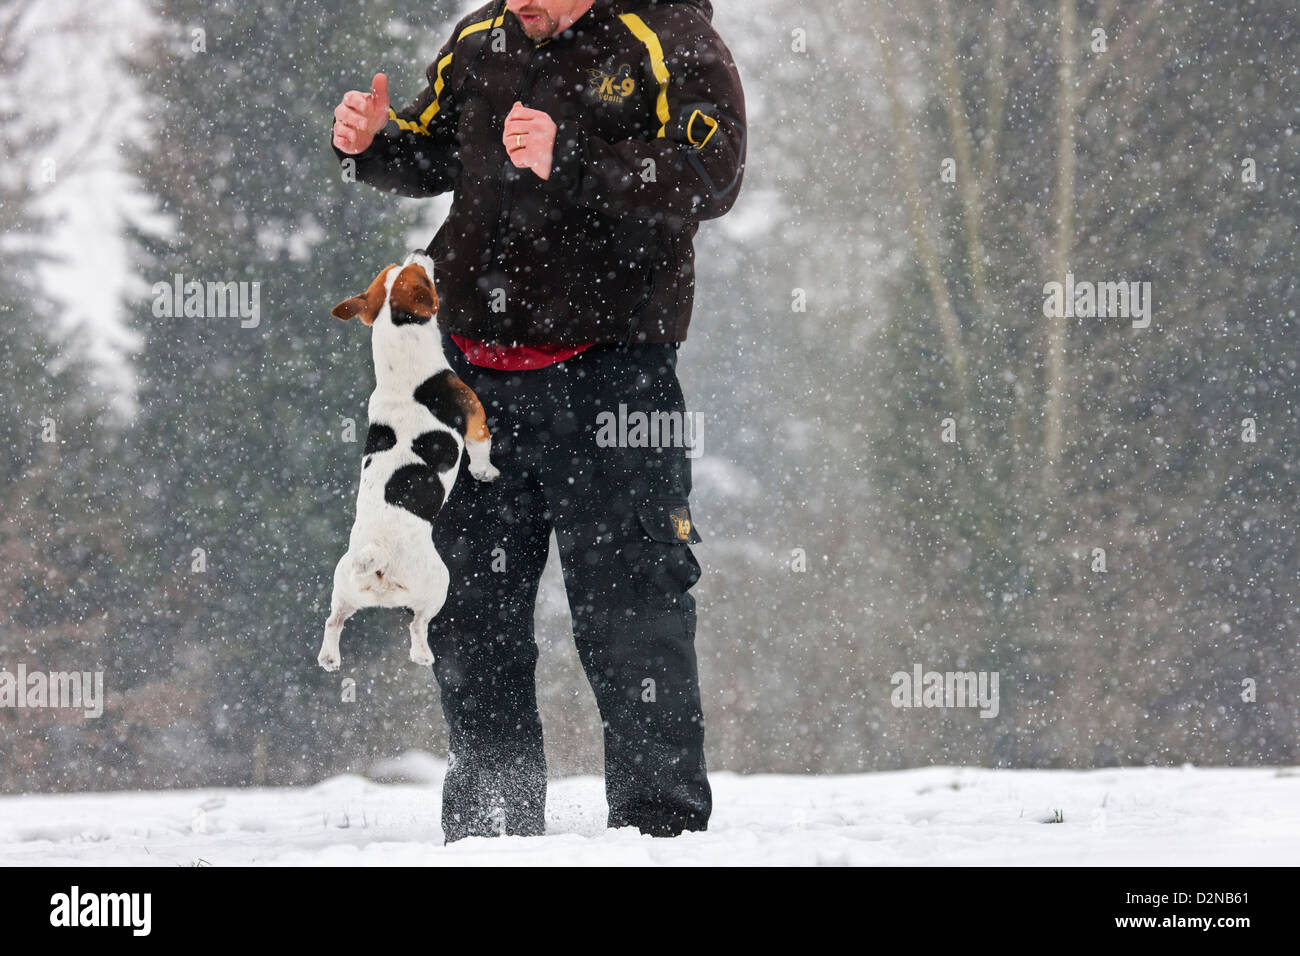 Jack Russell terrier dog jumping up against owner in the snow during snowfall in winter Stock Photo